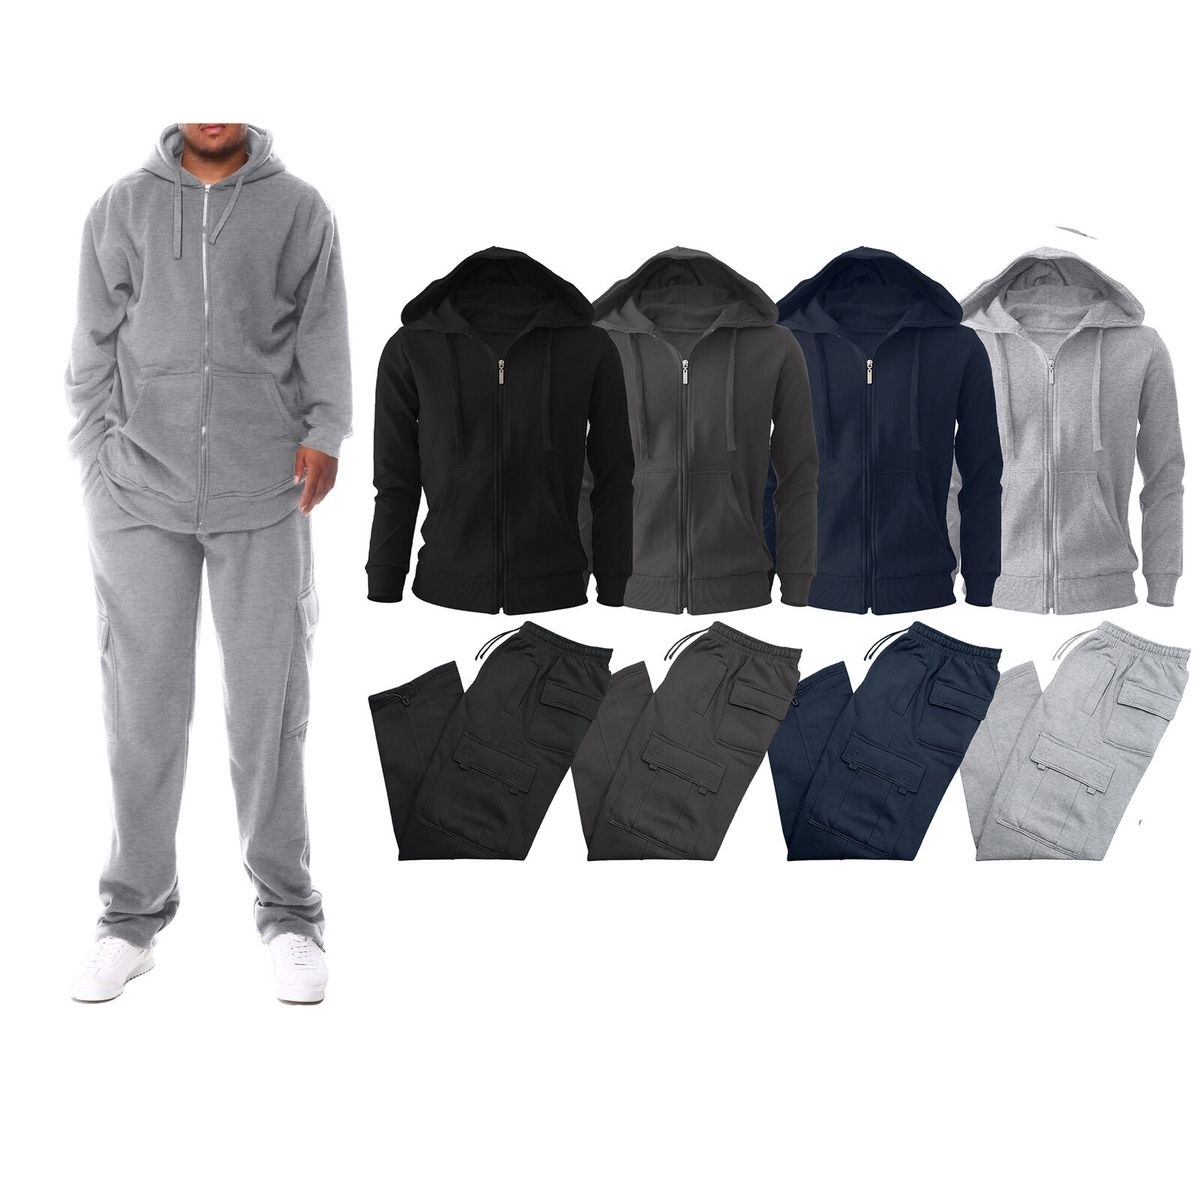 2-Pack: Men's Big & Tall Winter Warm Athletic Active Cozy Fleece Lined Multi-Pocket Full Zip Up Cargo Tracksuit - Navy, Xx-large